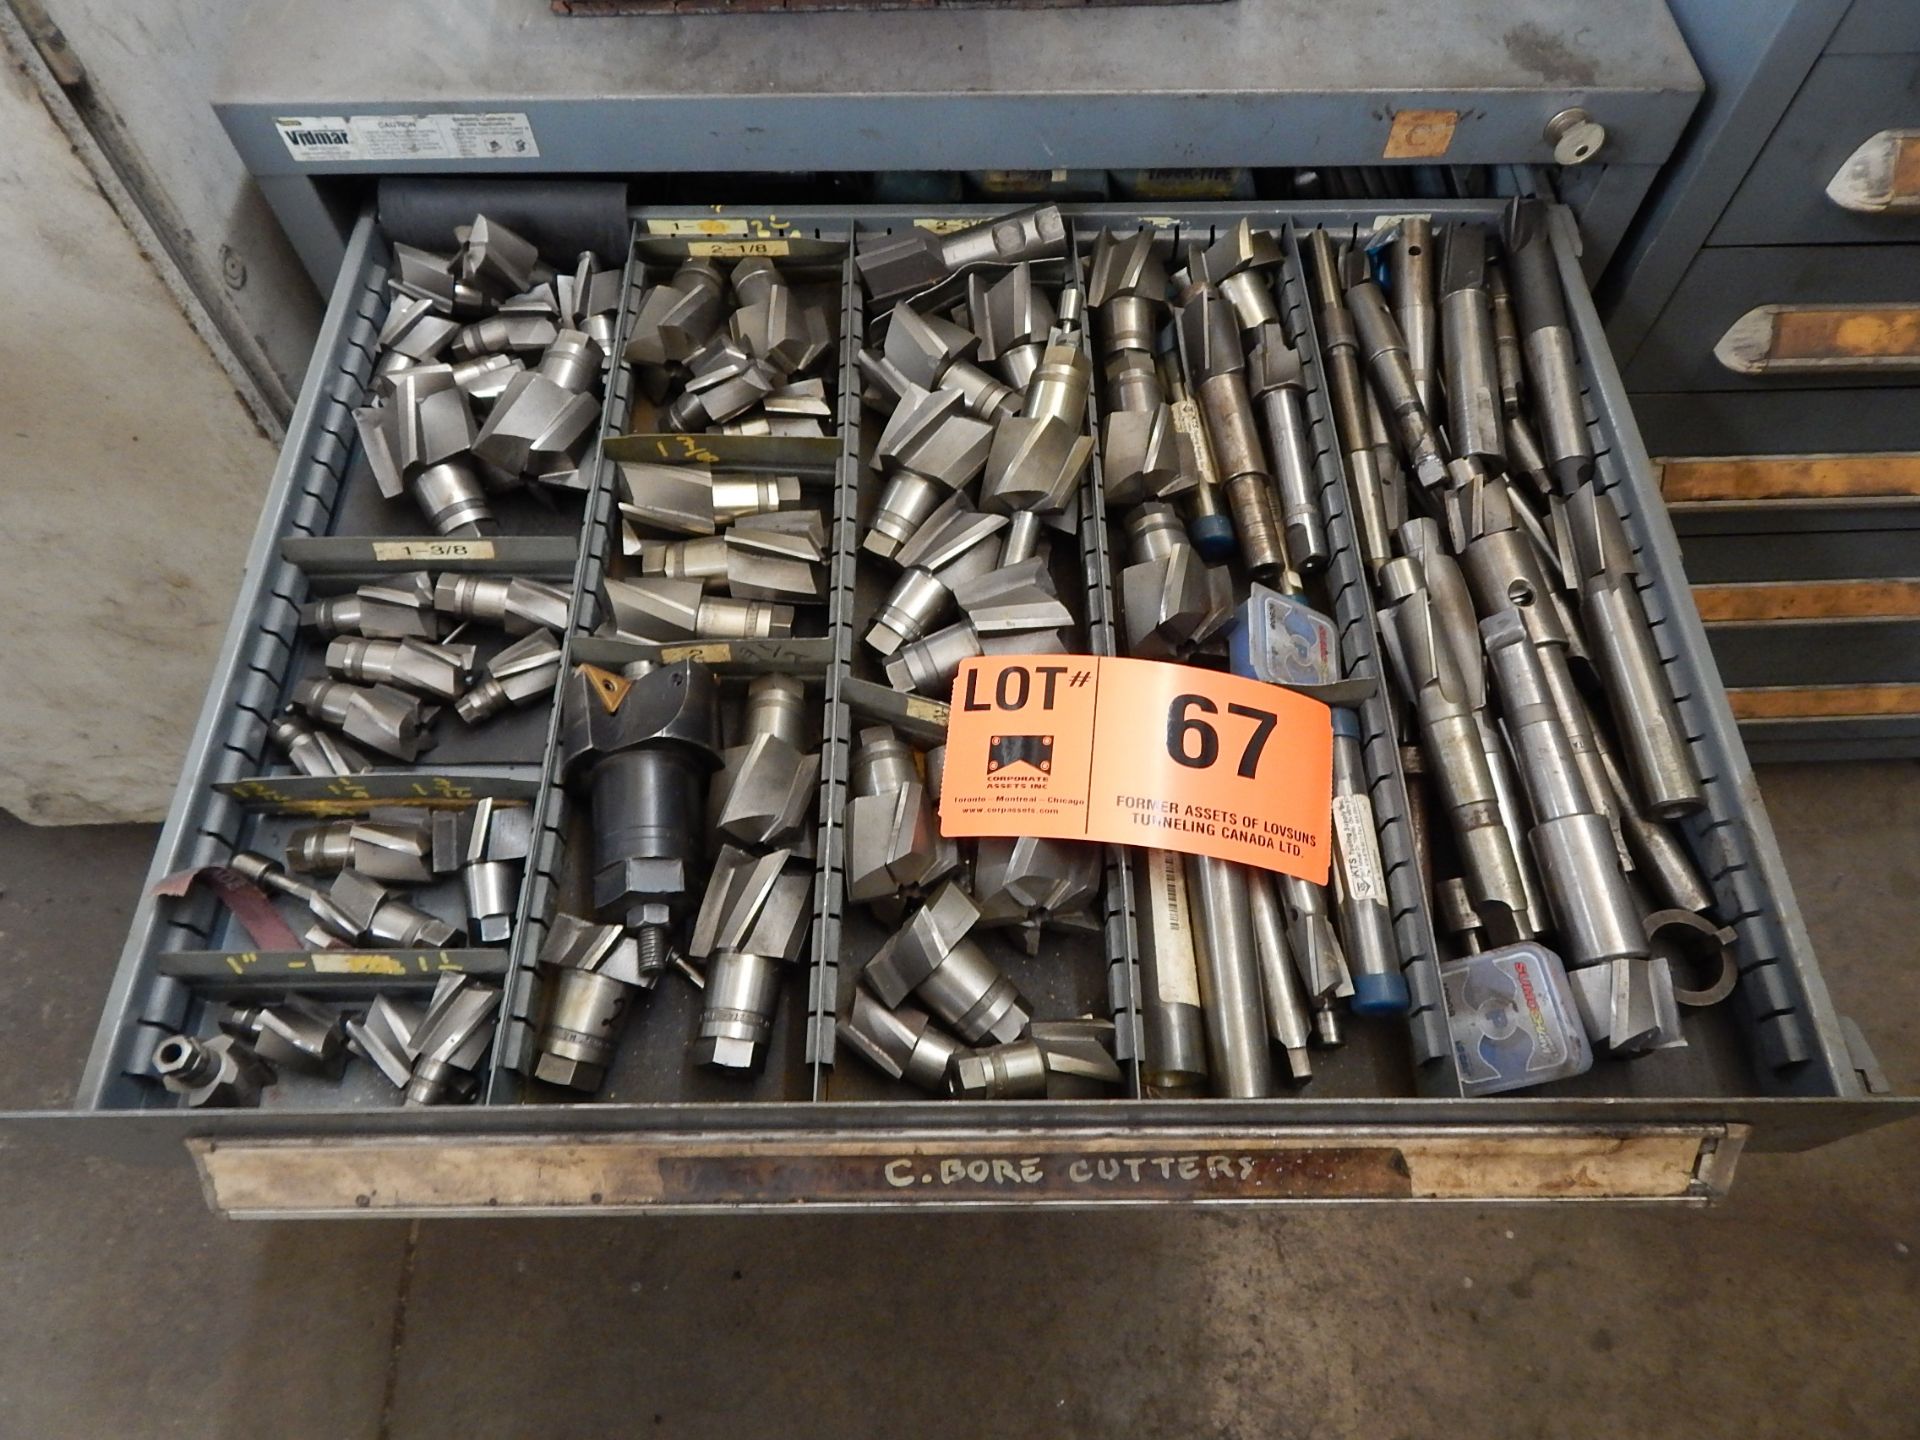 LOT/ CONTENTS OF DRAWER CONSISTING OF CUTTERS